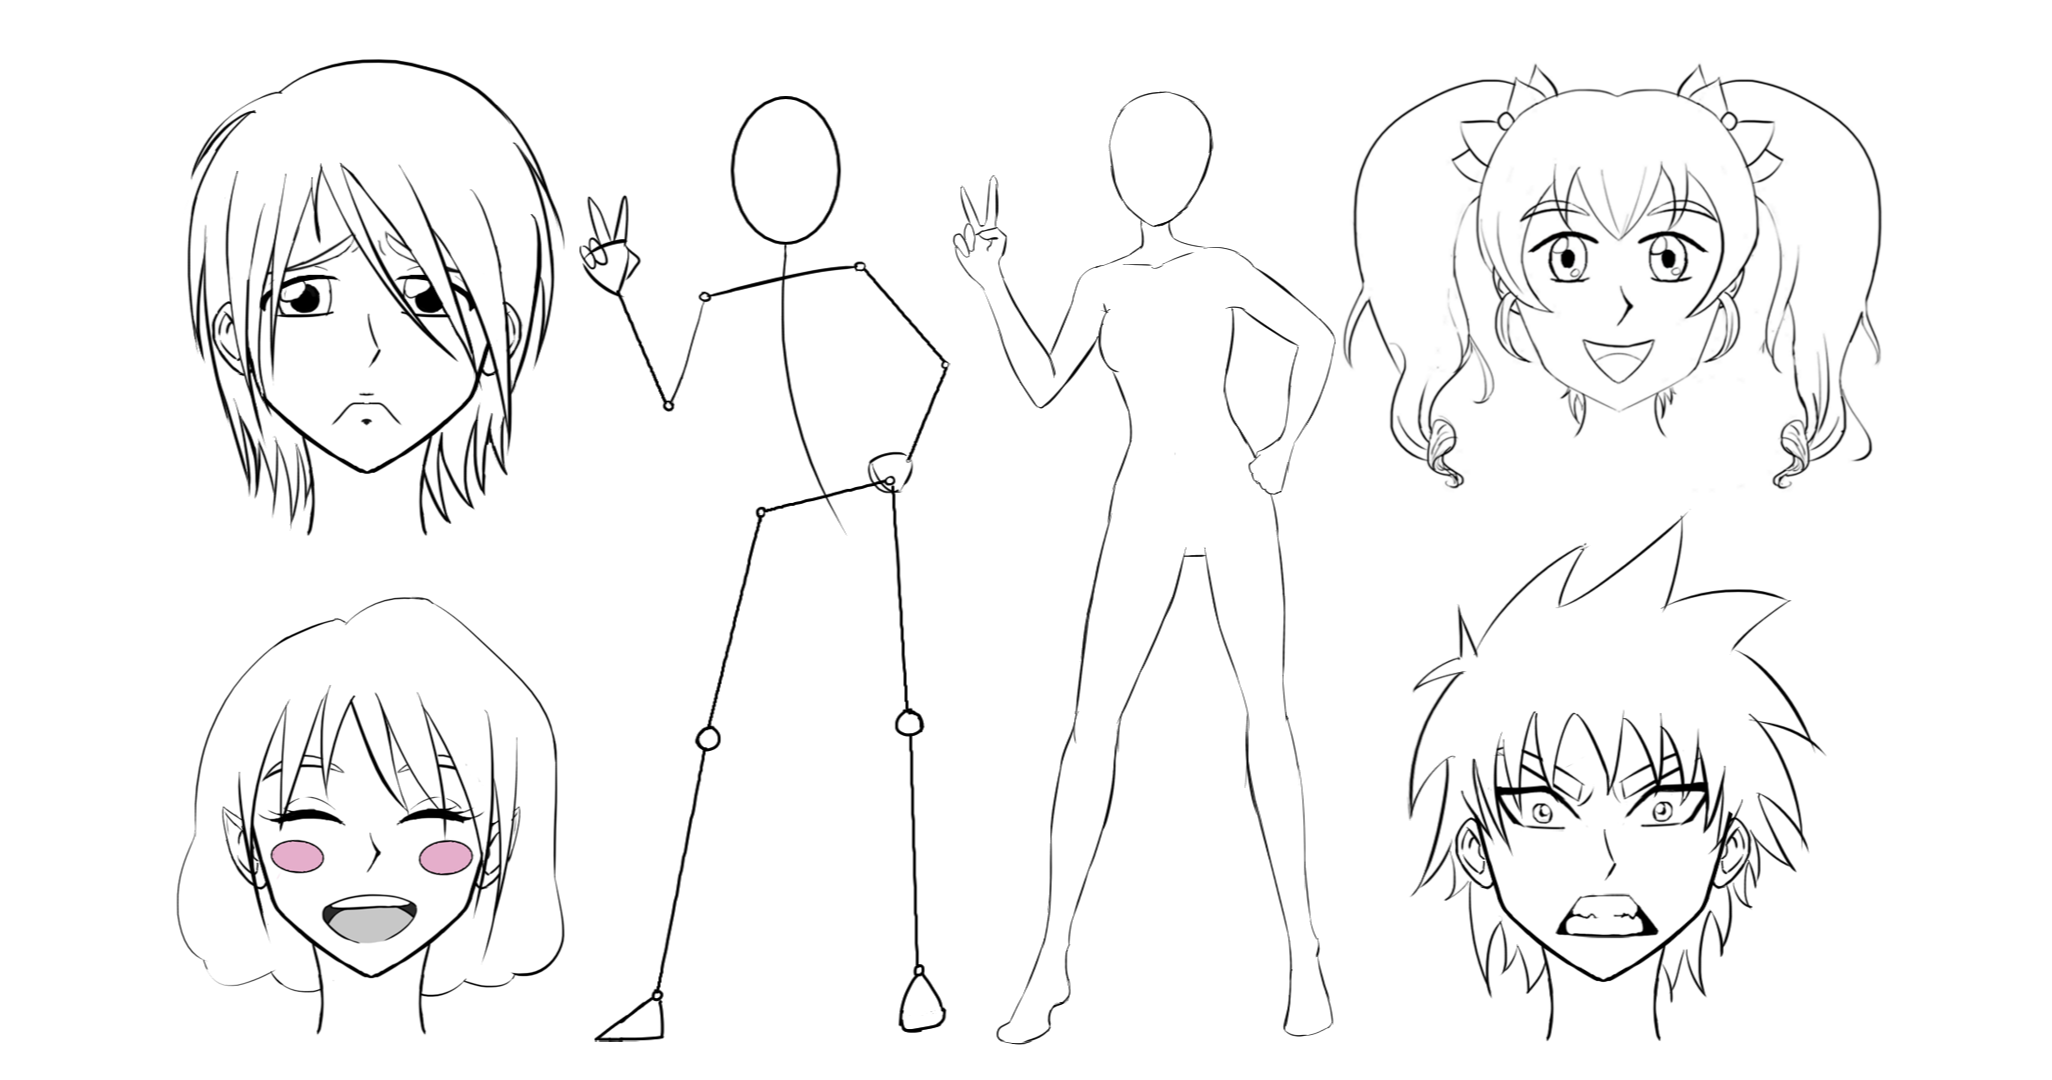 Drawing Anime Manga Style Characters For Beginners Camp Small Online Class For Ages 10 15